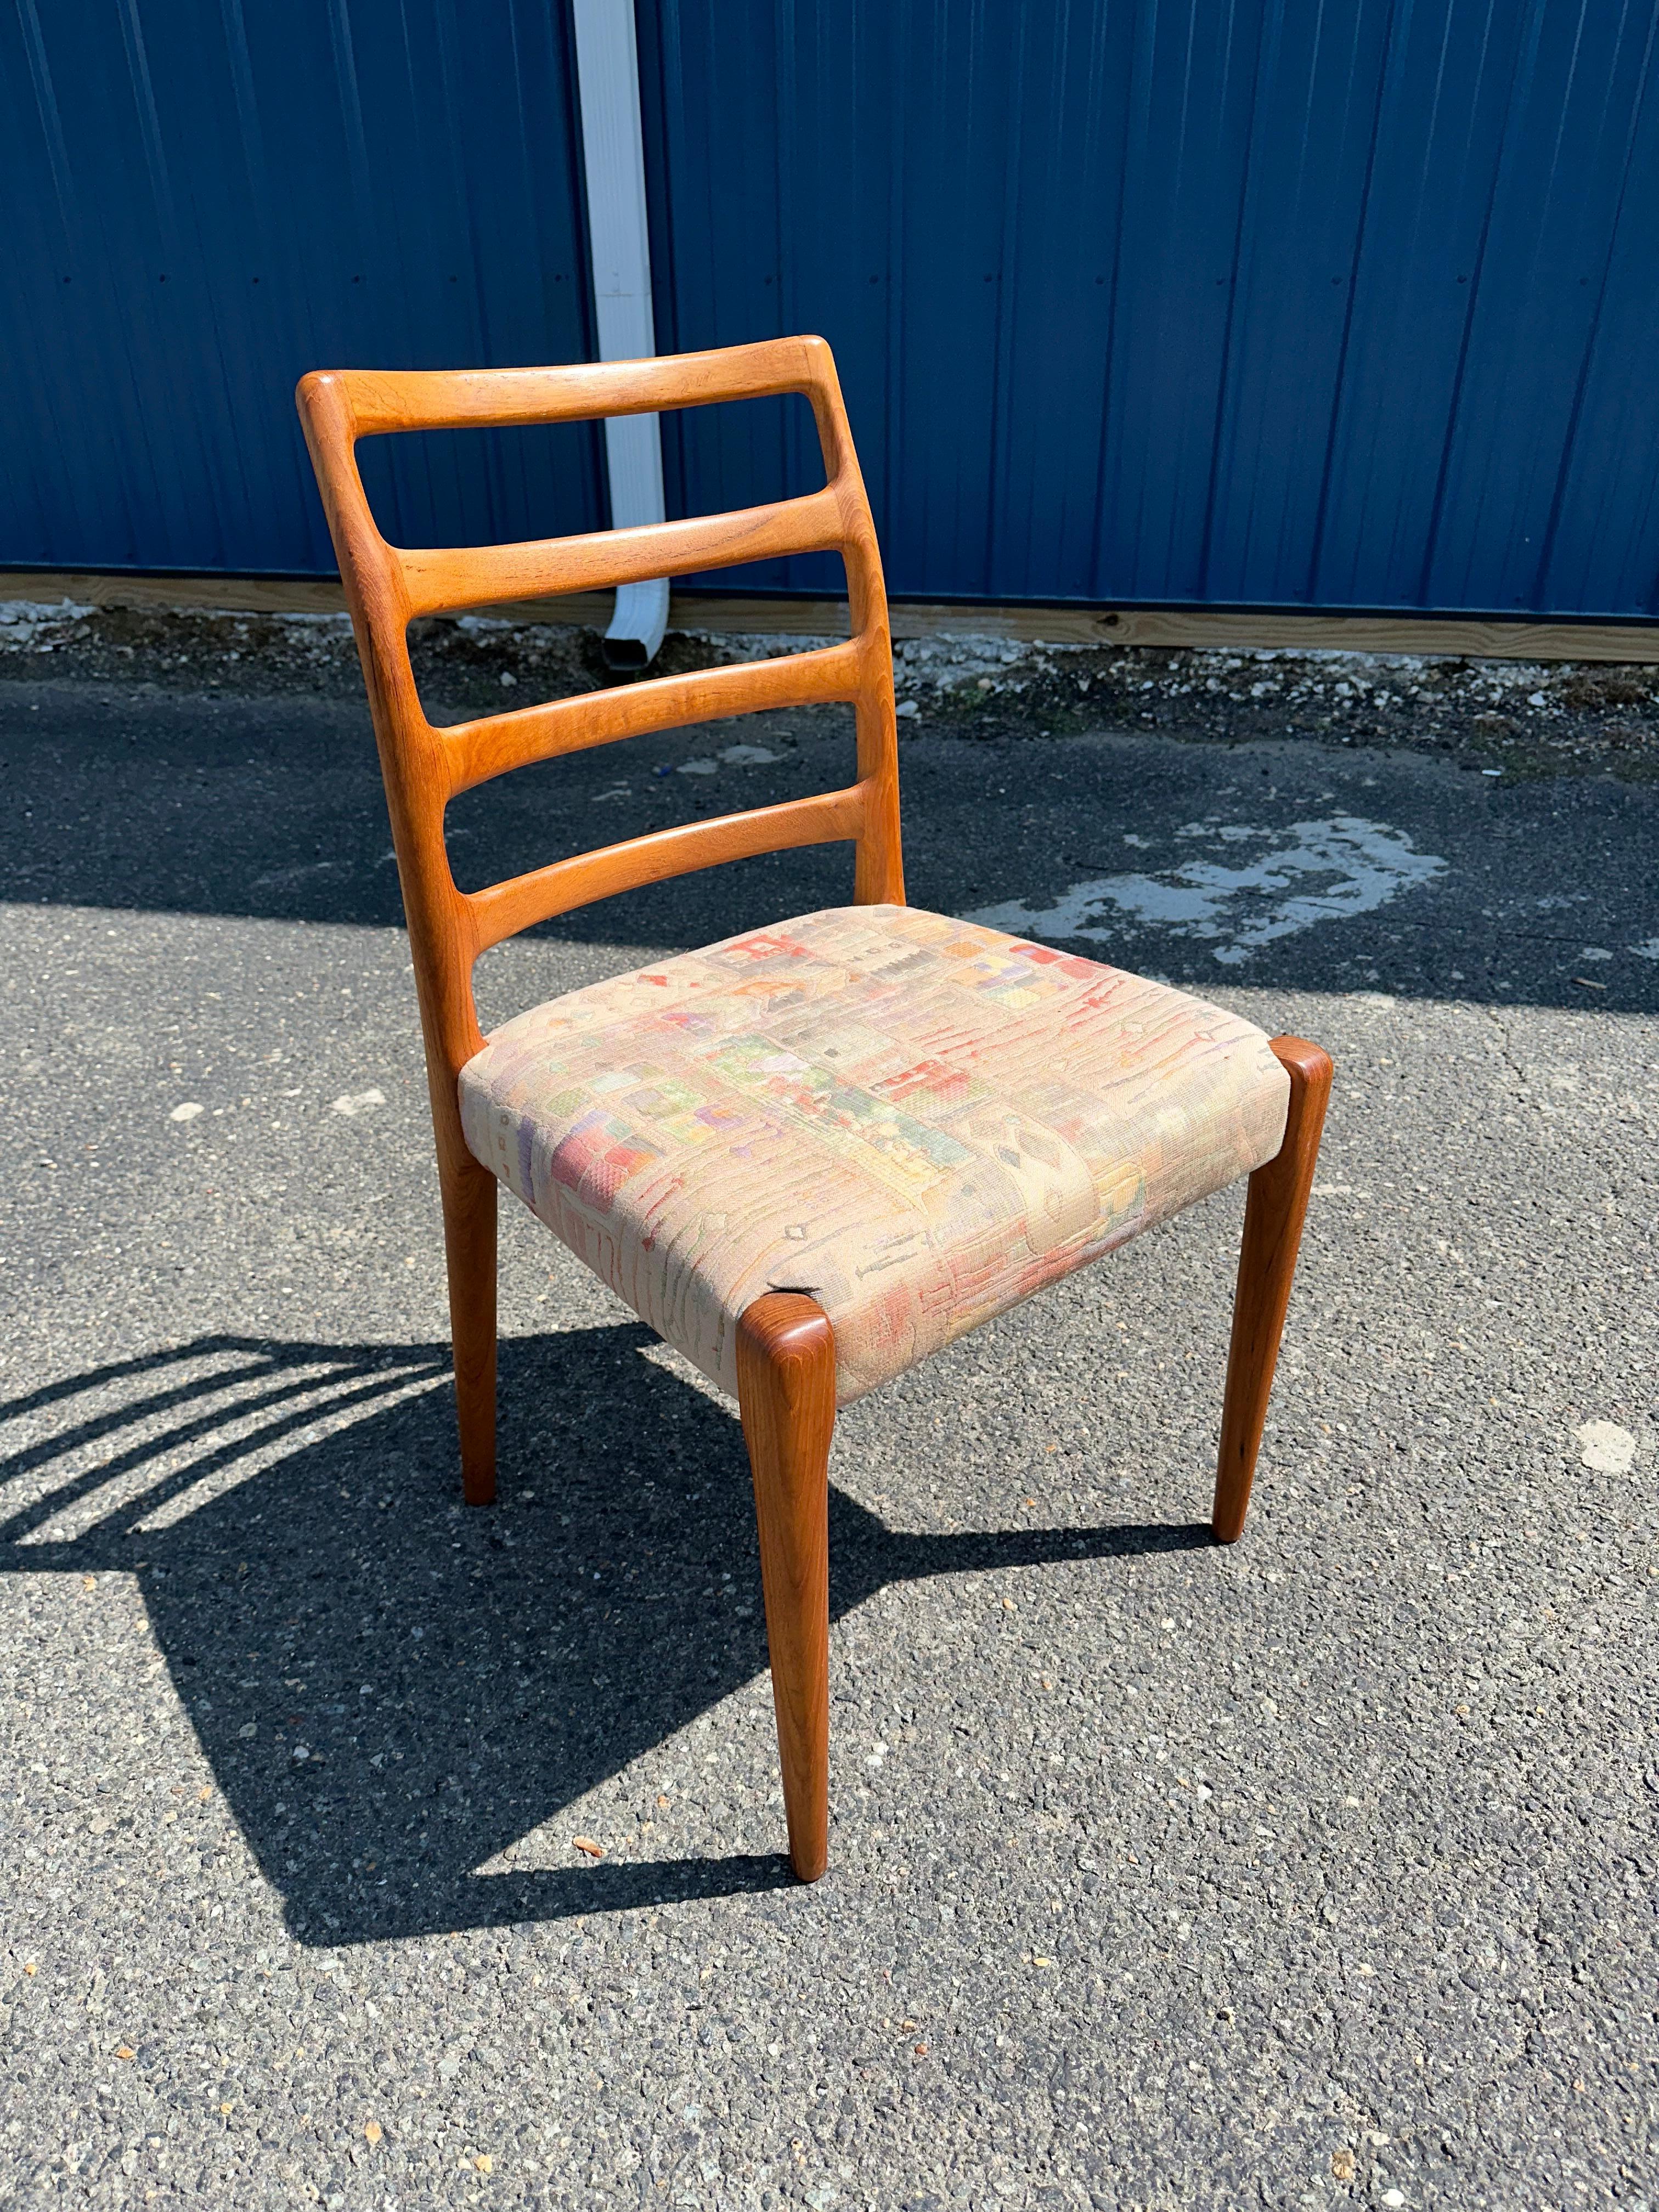 Full set of ten Danish made dining chairs! Warm teak wood frames with cushioned seats. Ladder backs that slope back for comfort.
Please confirm location NY or NJ.